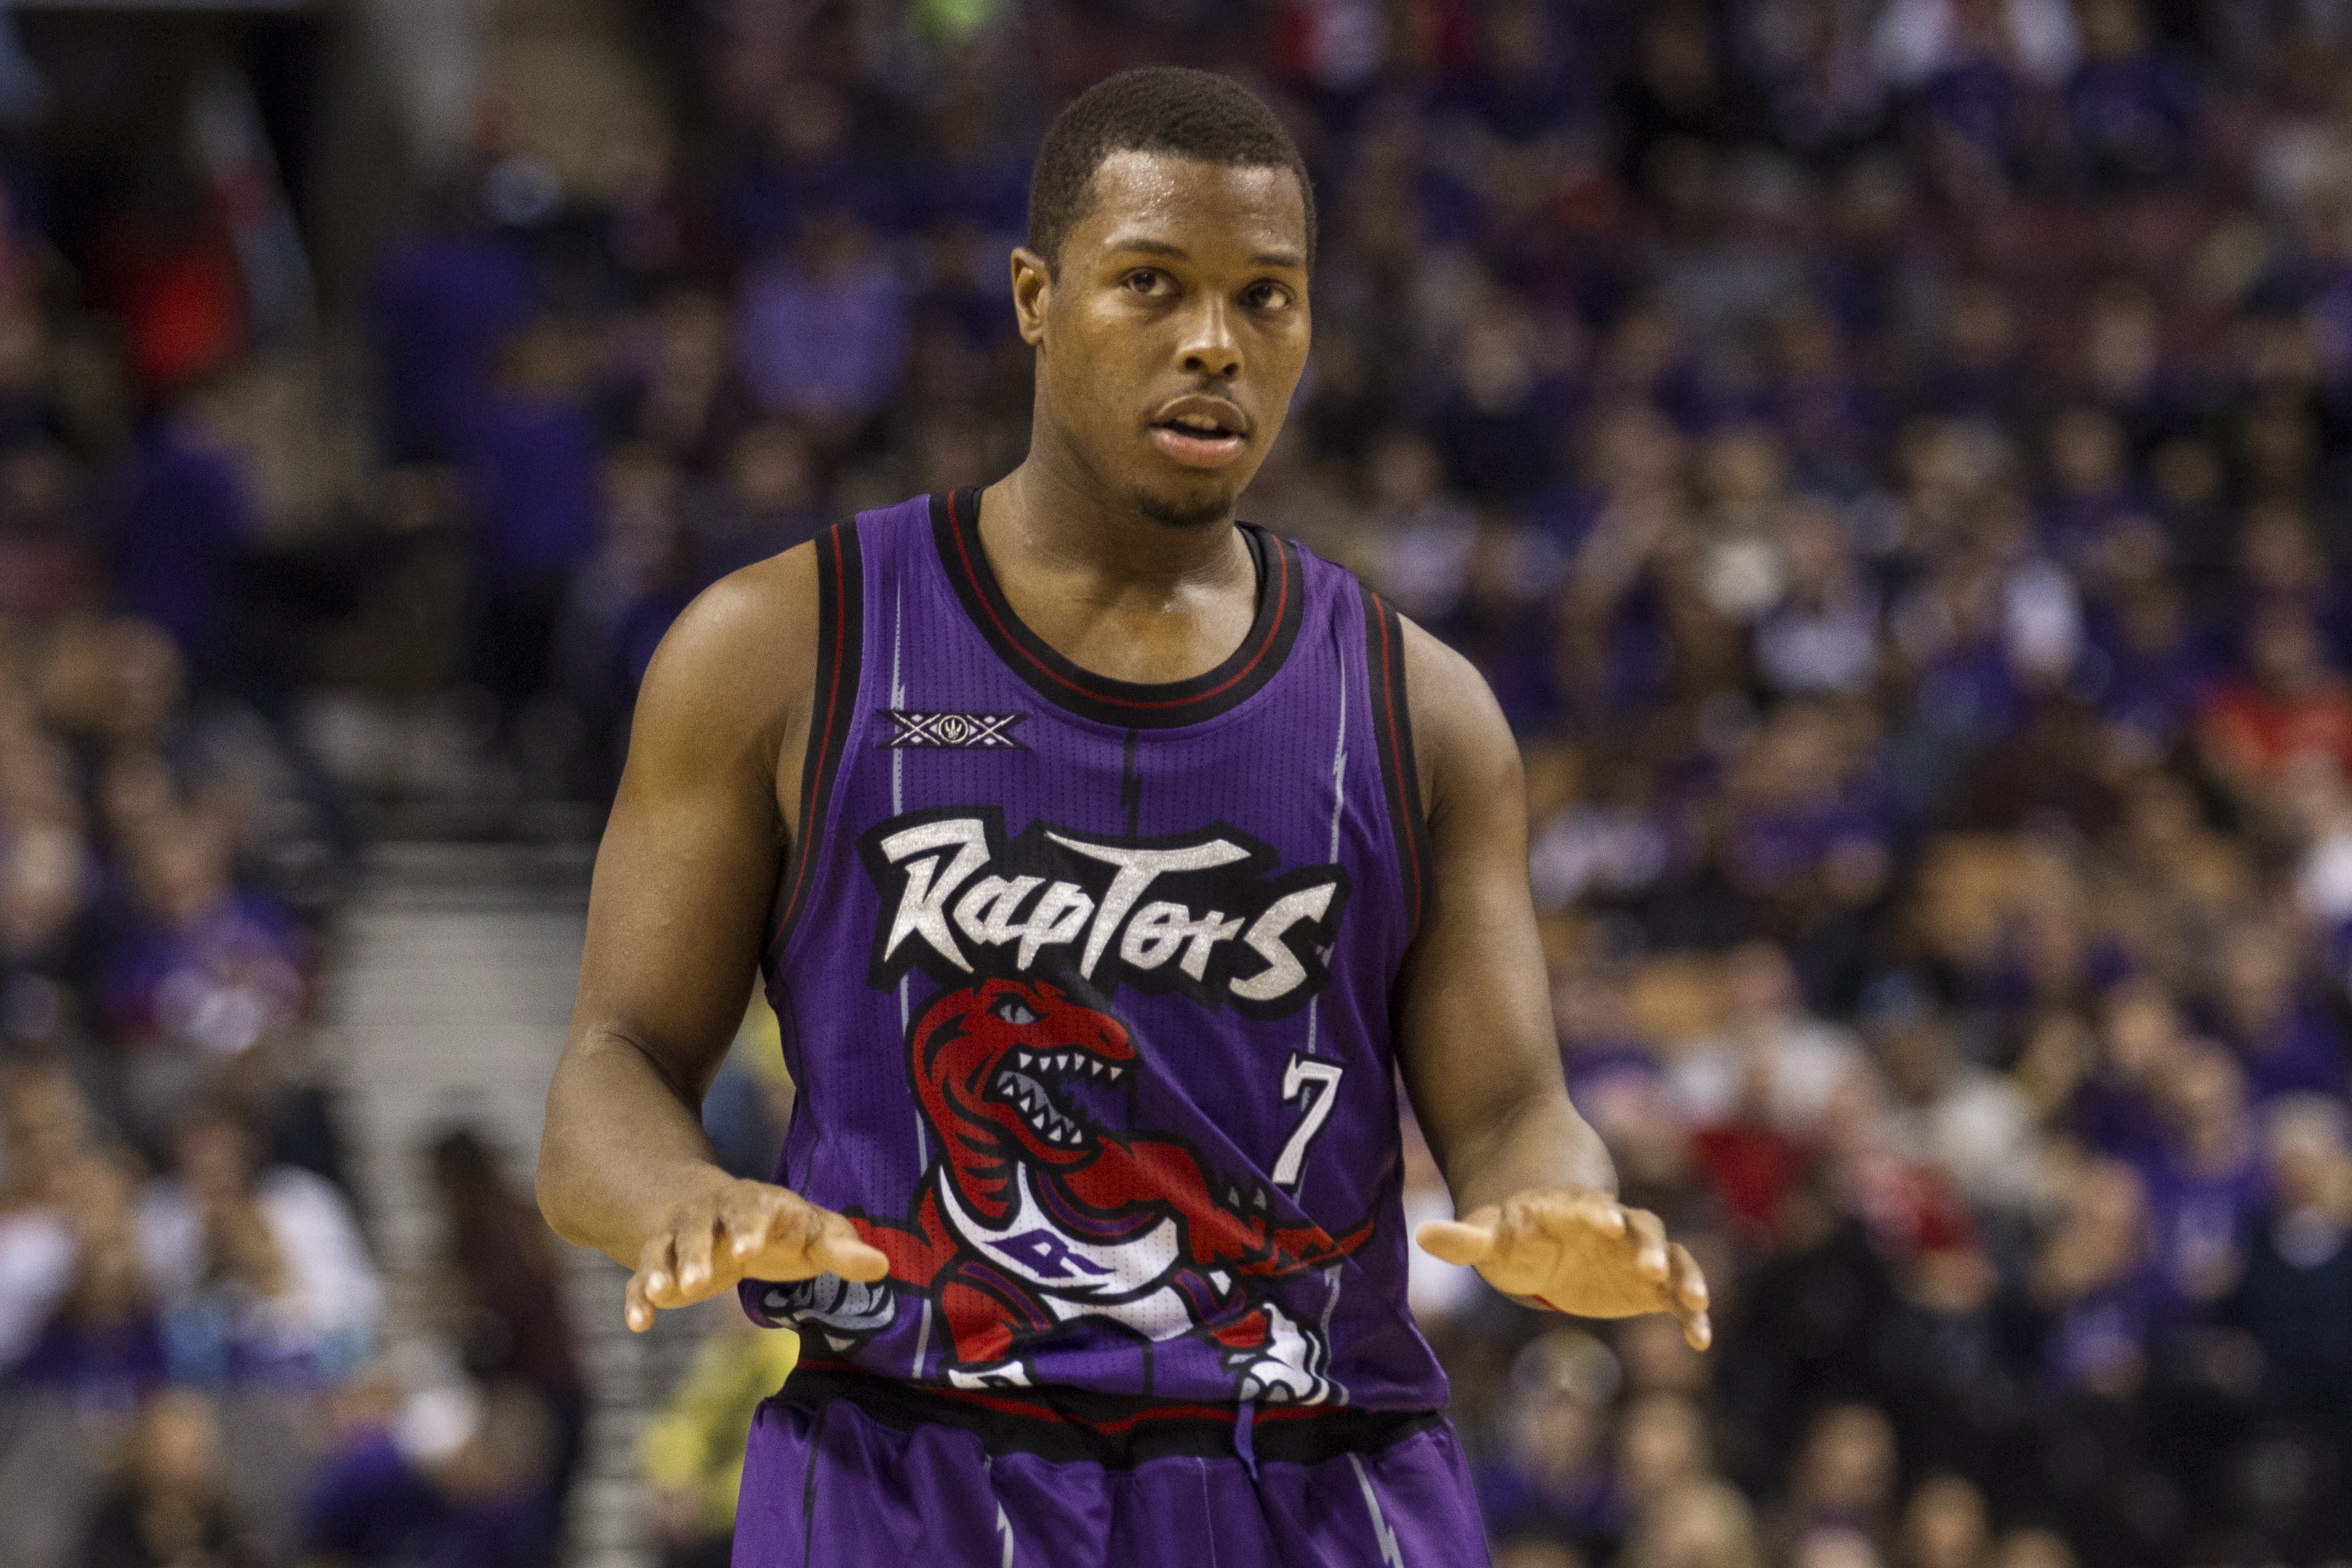 Kyle Lowry images 48 wallpapers   Qularicom 3600x2400